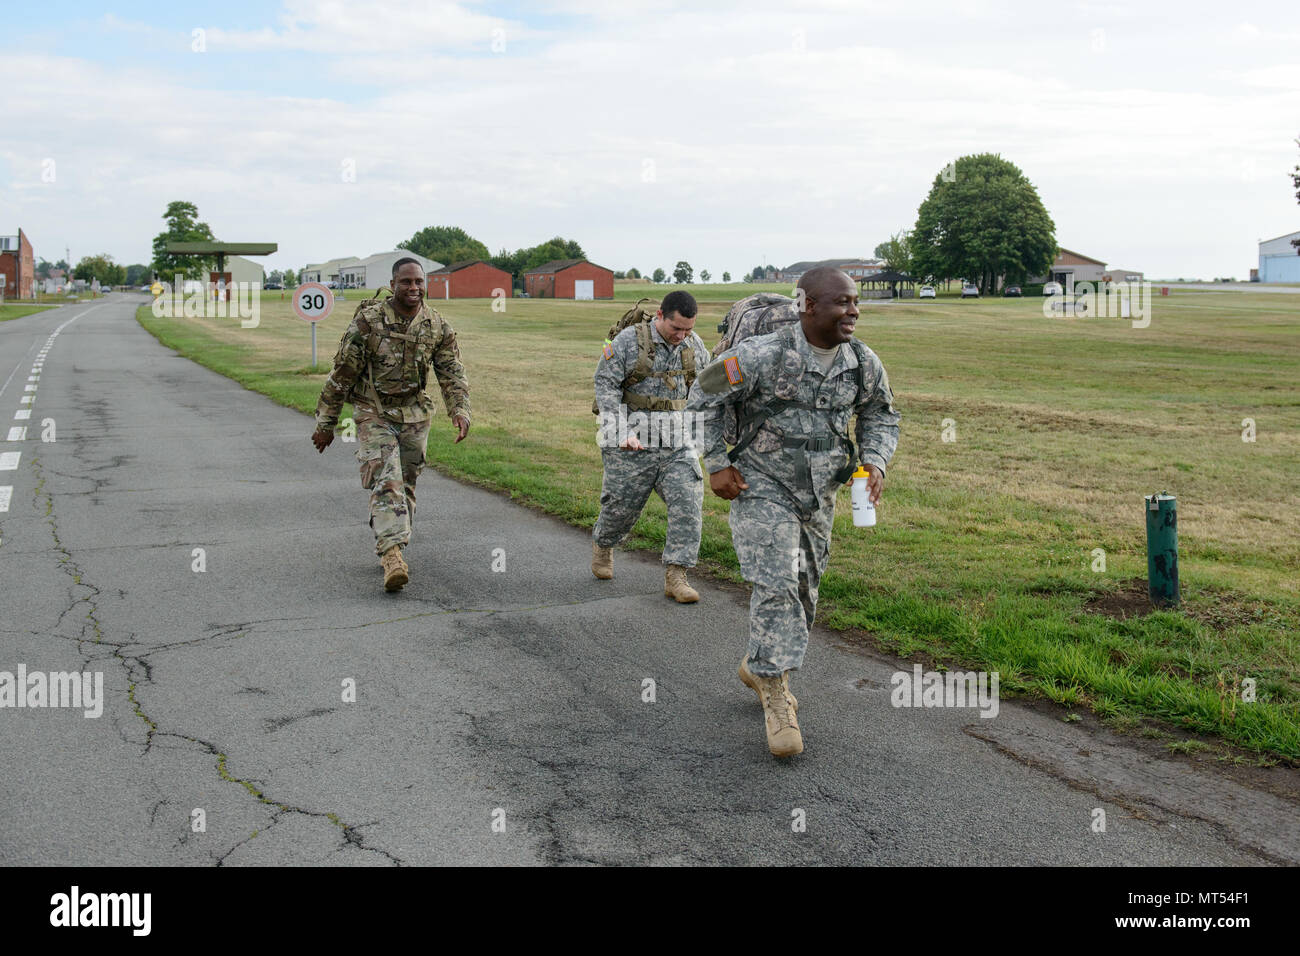 U.S. Army Lt. Col. Frank E. Jefferson Jr., left, Commander, Allied Forces North (AFNORTH) Battalion, walks with Sgt. Christian Sanchez and Staff Sgt. Alexander Ndifor, both assigned to Headquarters and Headquarters Company, AFNORTH Battalion as they take care of their physical condition by performing a 9-mile ruck march on Chièvres air Base, Belgium, July 20, 2017. (U.S. Army photo by Visual Information Specialist Pierre-Etienne Courtejoie) Stock Photo